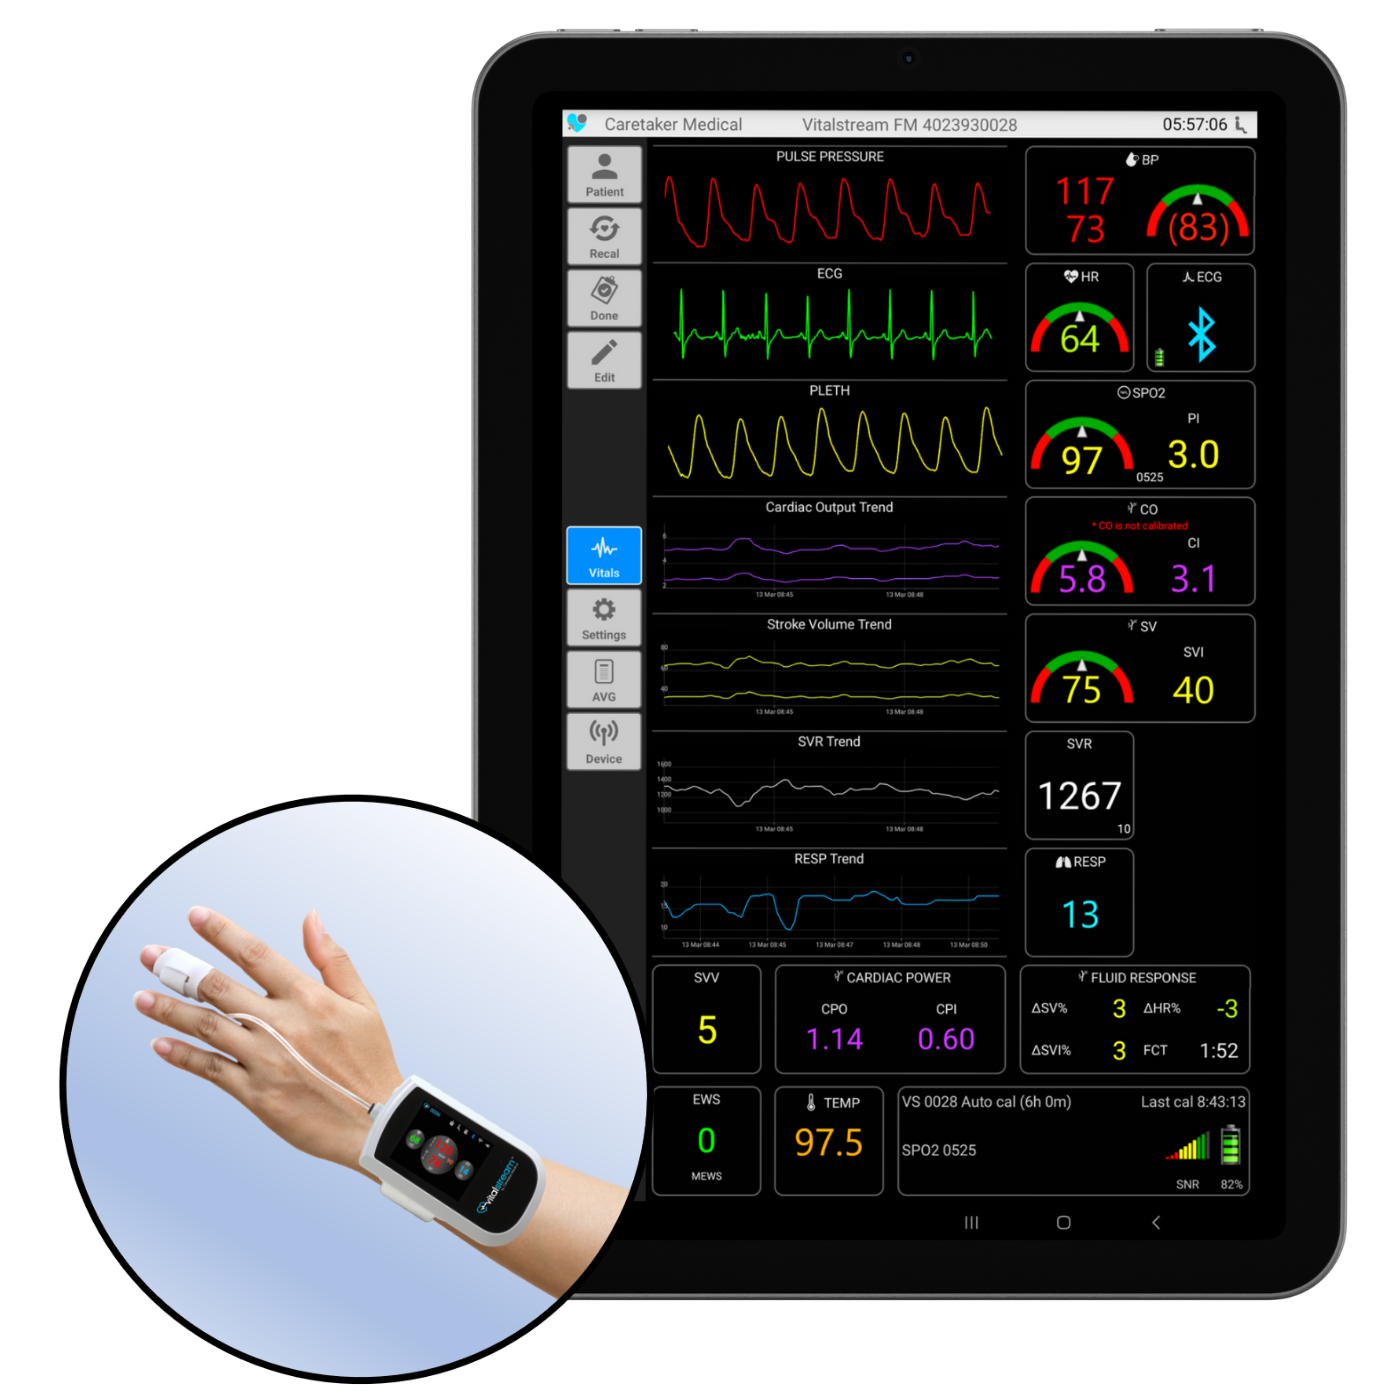 VitalStream tablet and wearable vital signs monitor